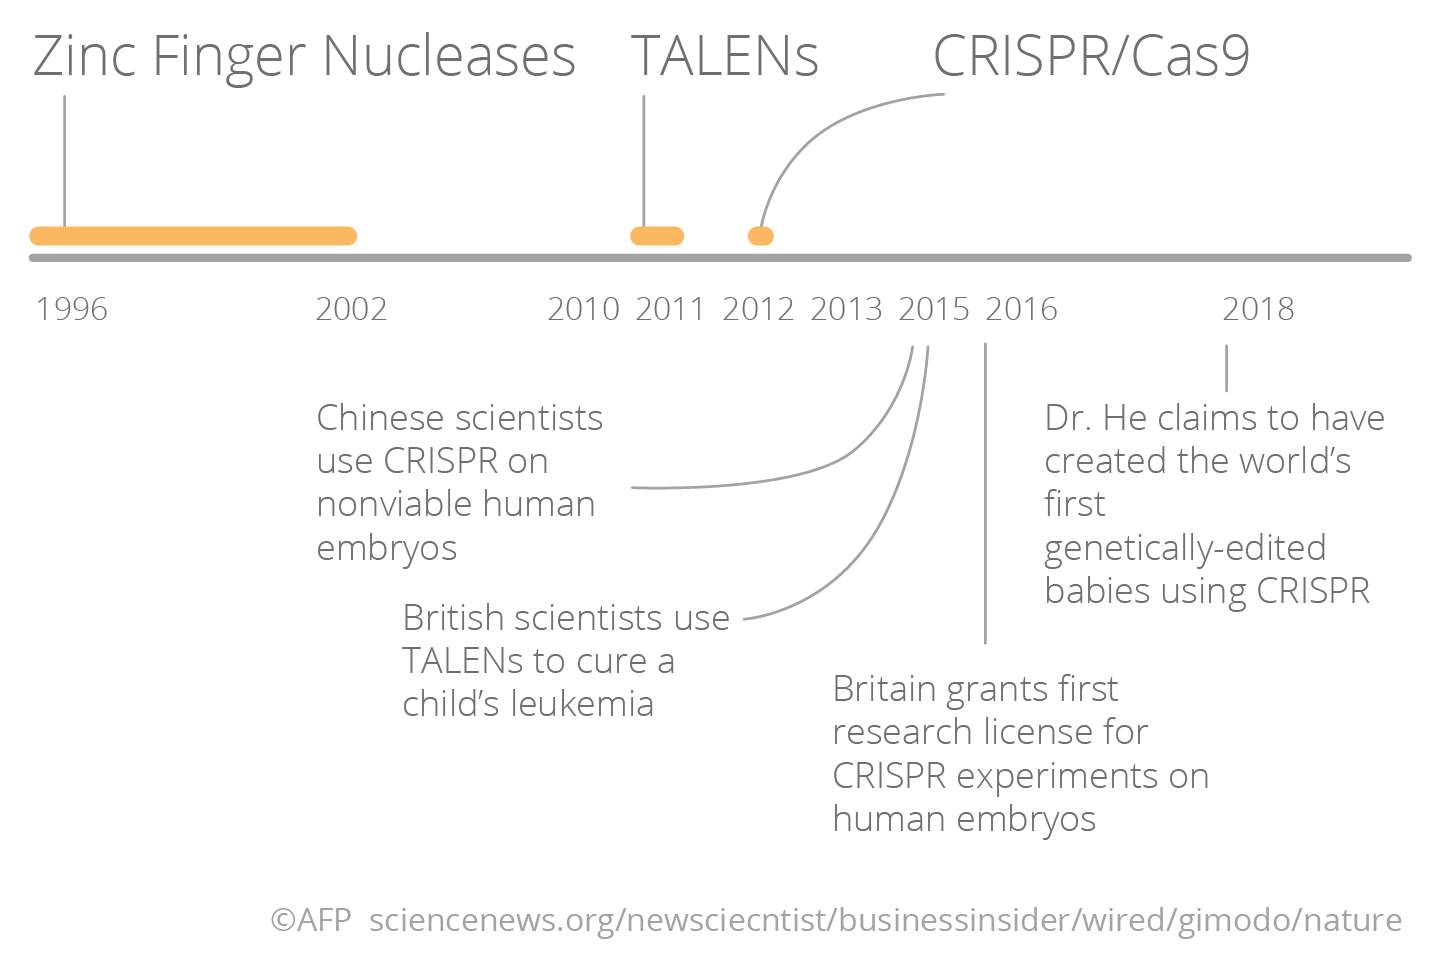 Graph showing CRISPR/Cas9 vastly cuts down the time needed for genetic experiments.